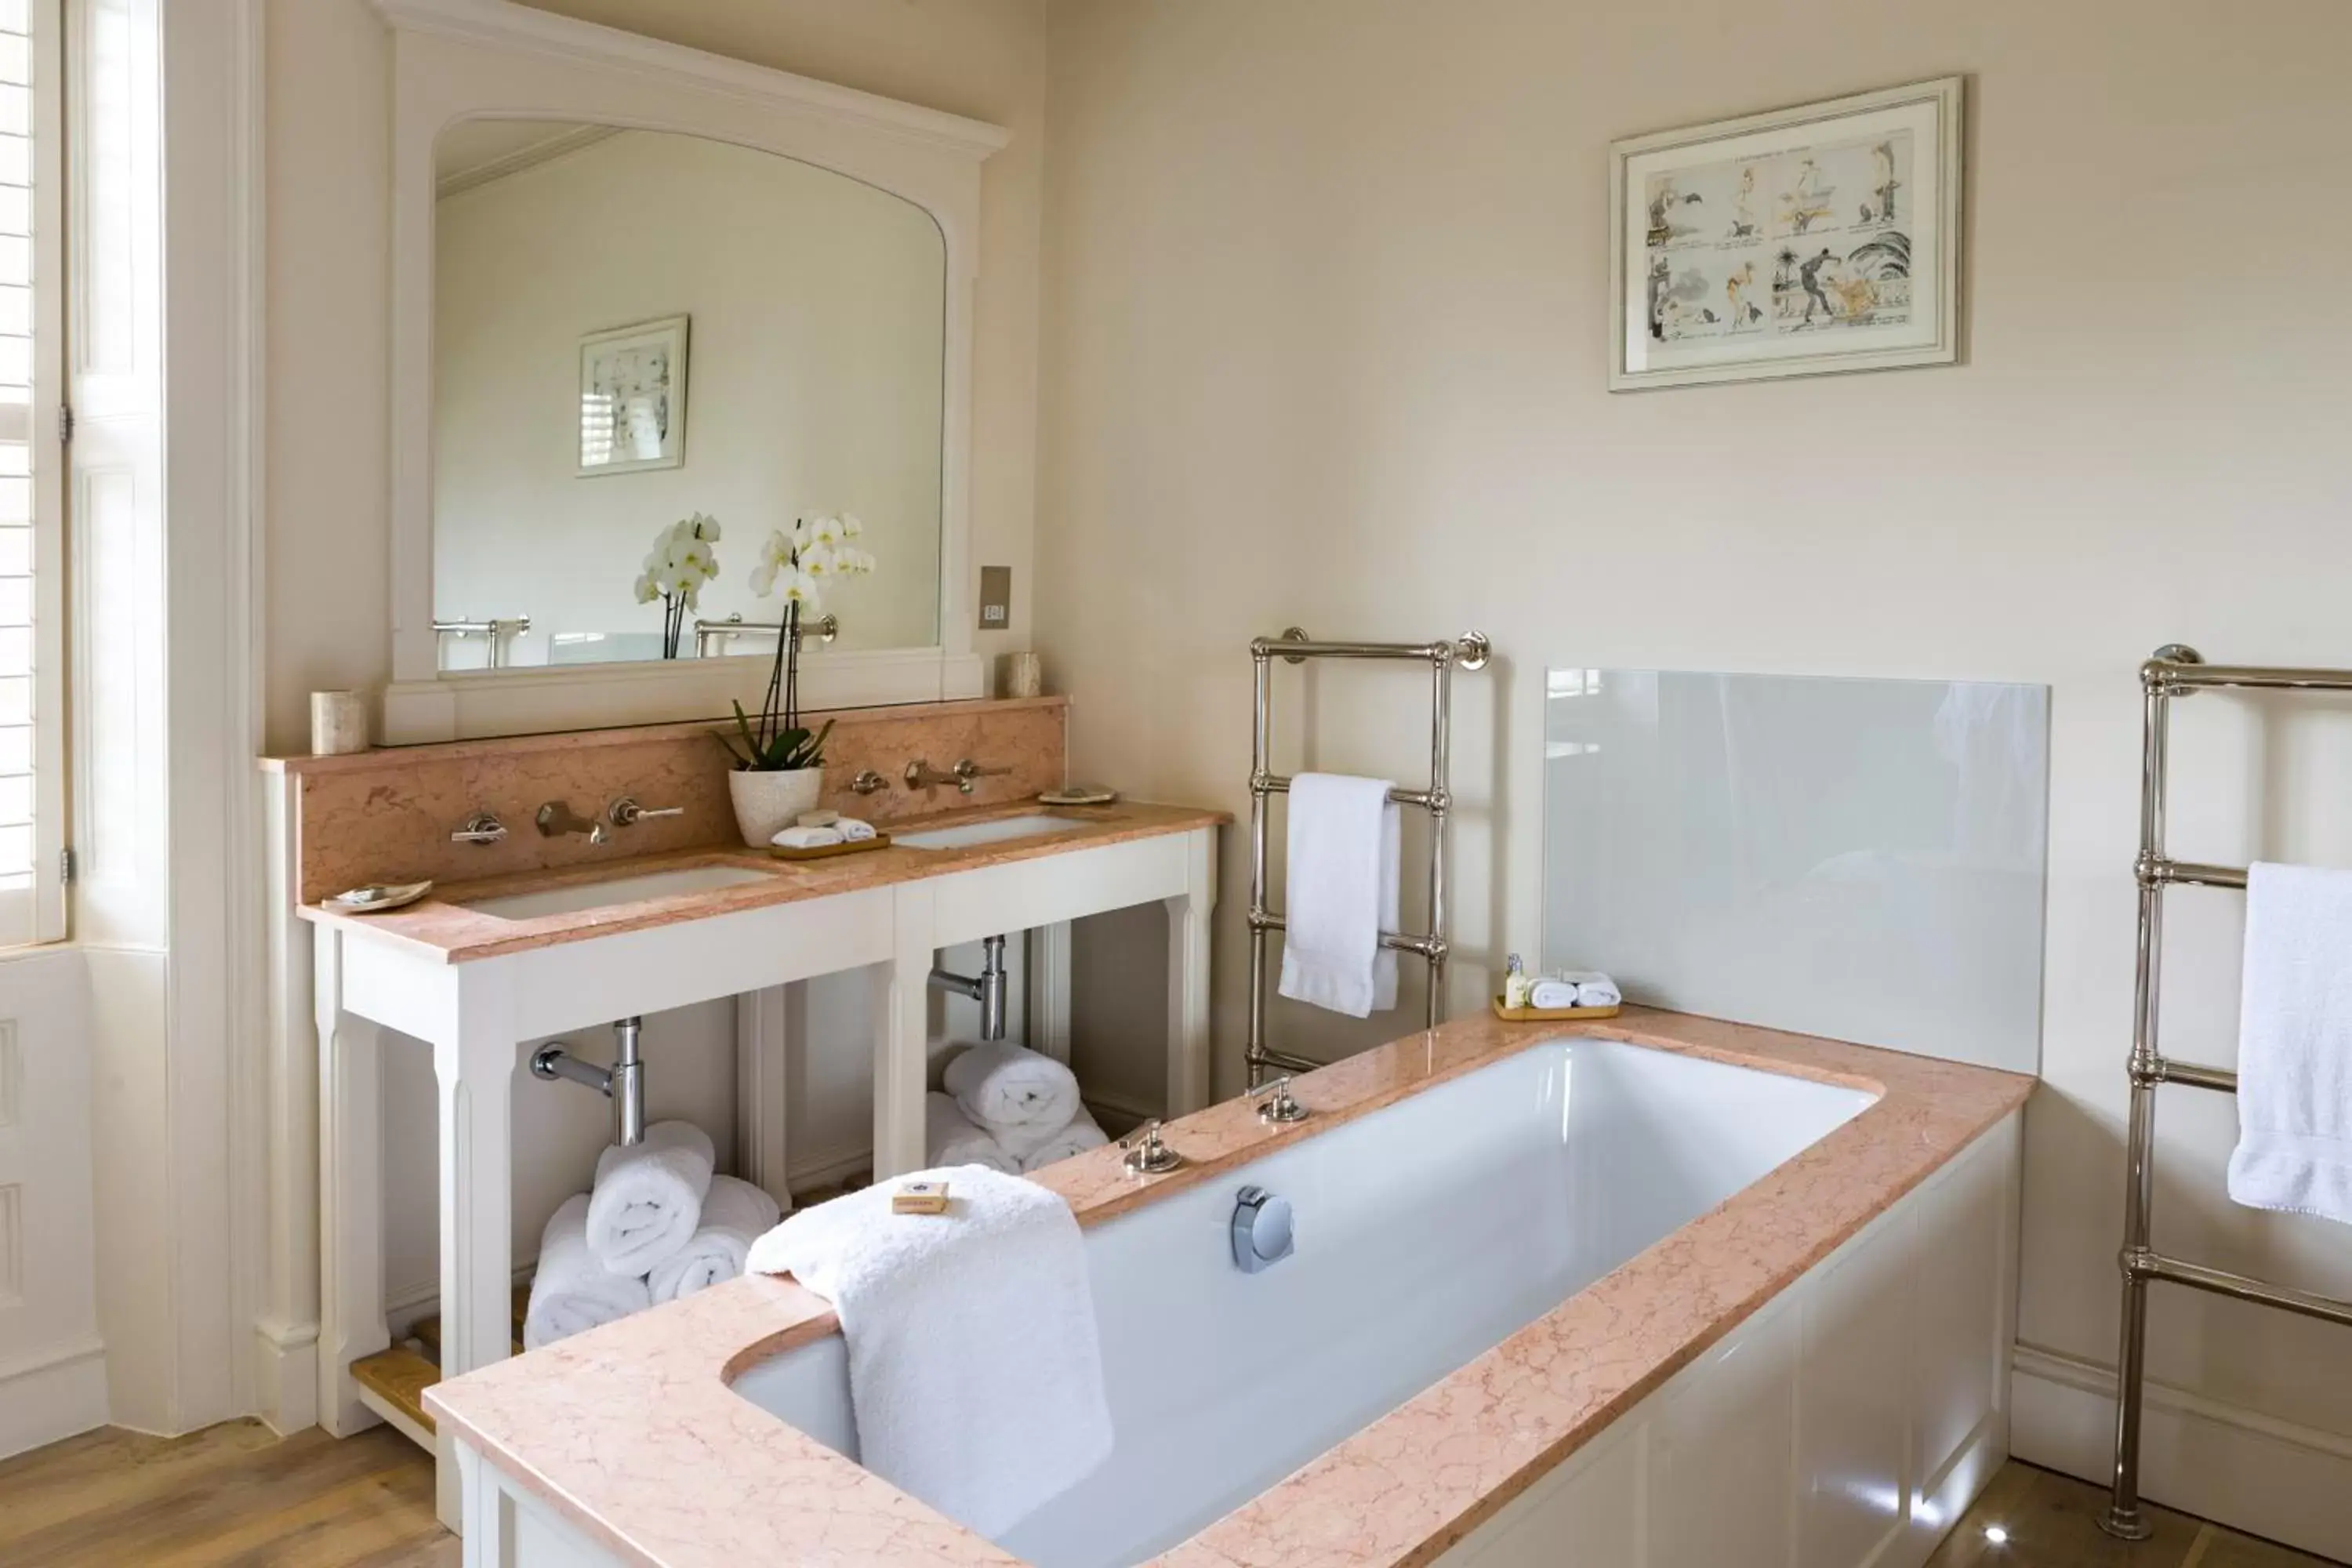 Bathroom in The Bath Priory - A Relais & Chateaux Hotel